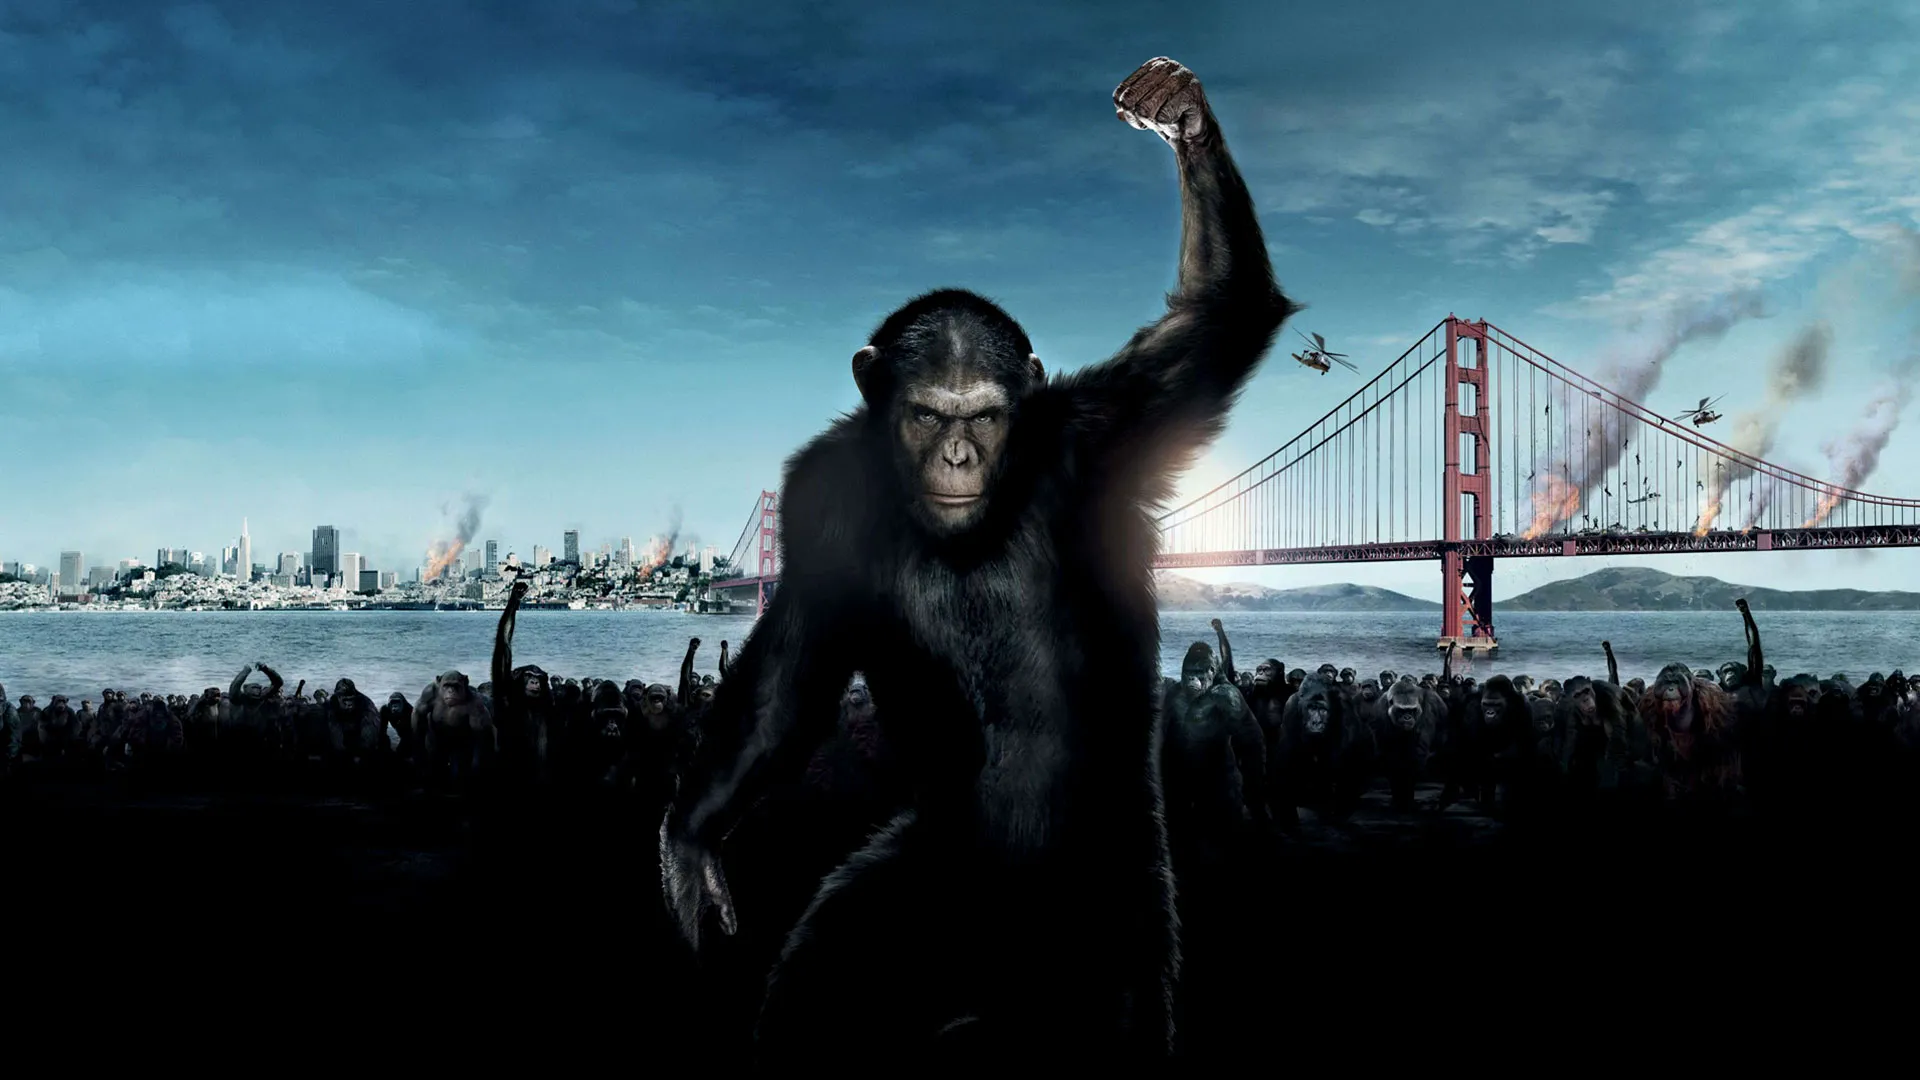 Rise of the Planet of the Apes background